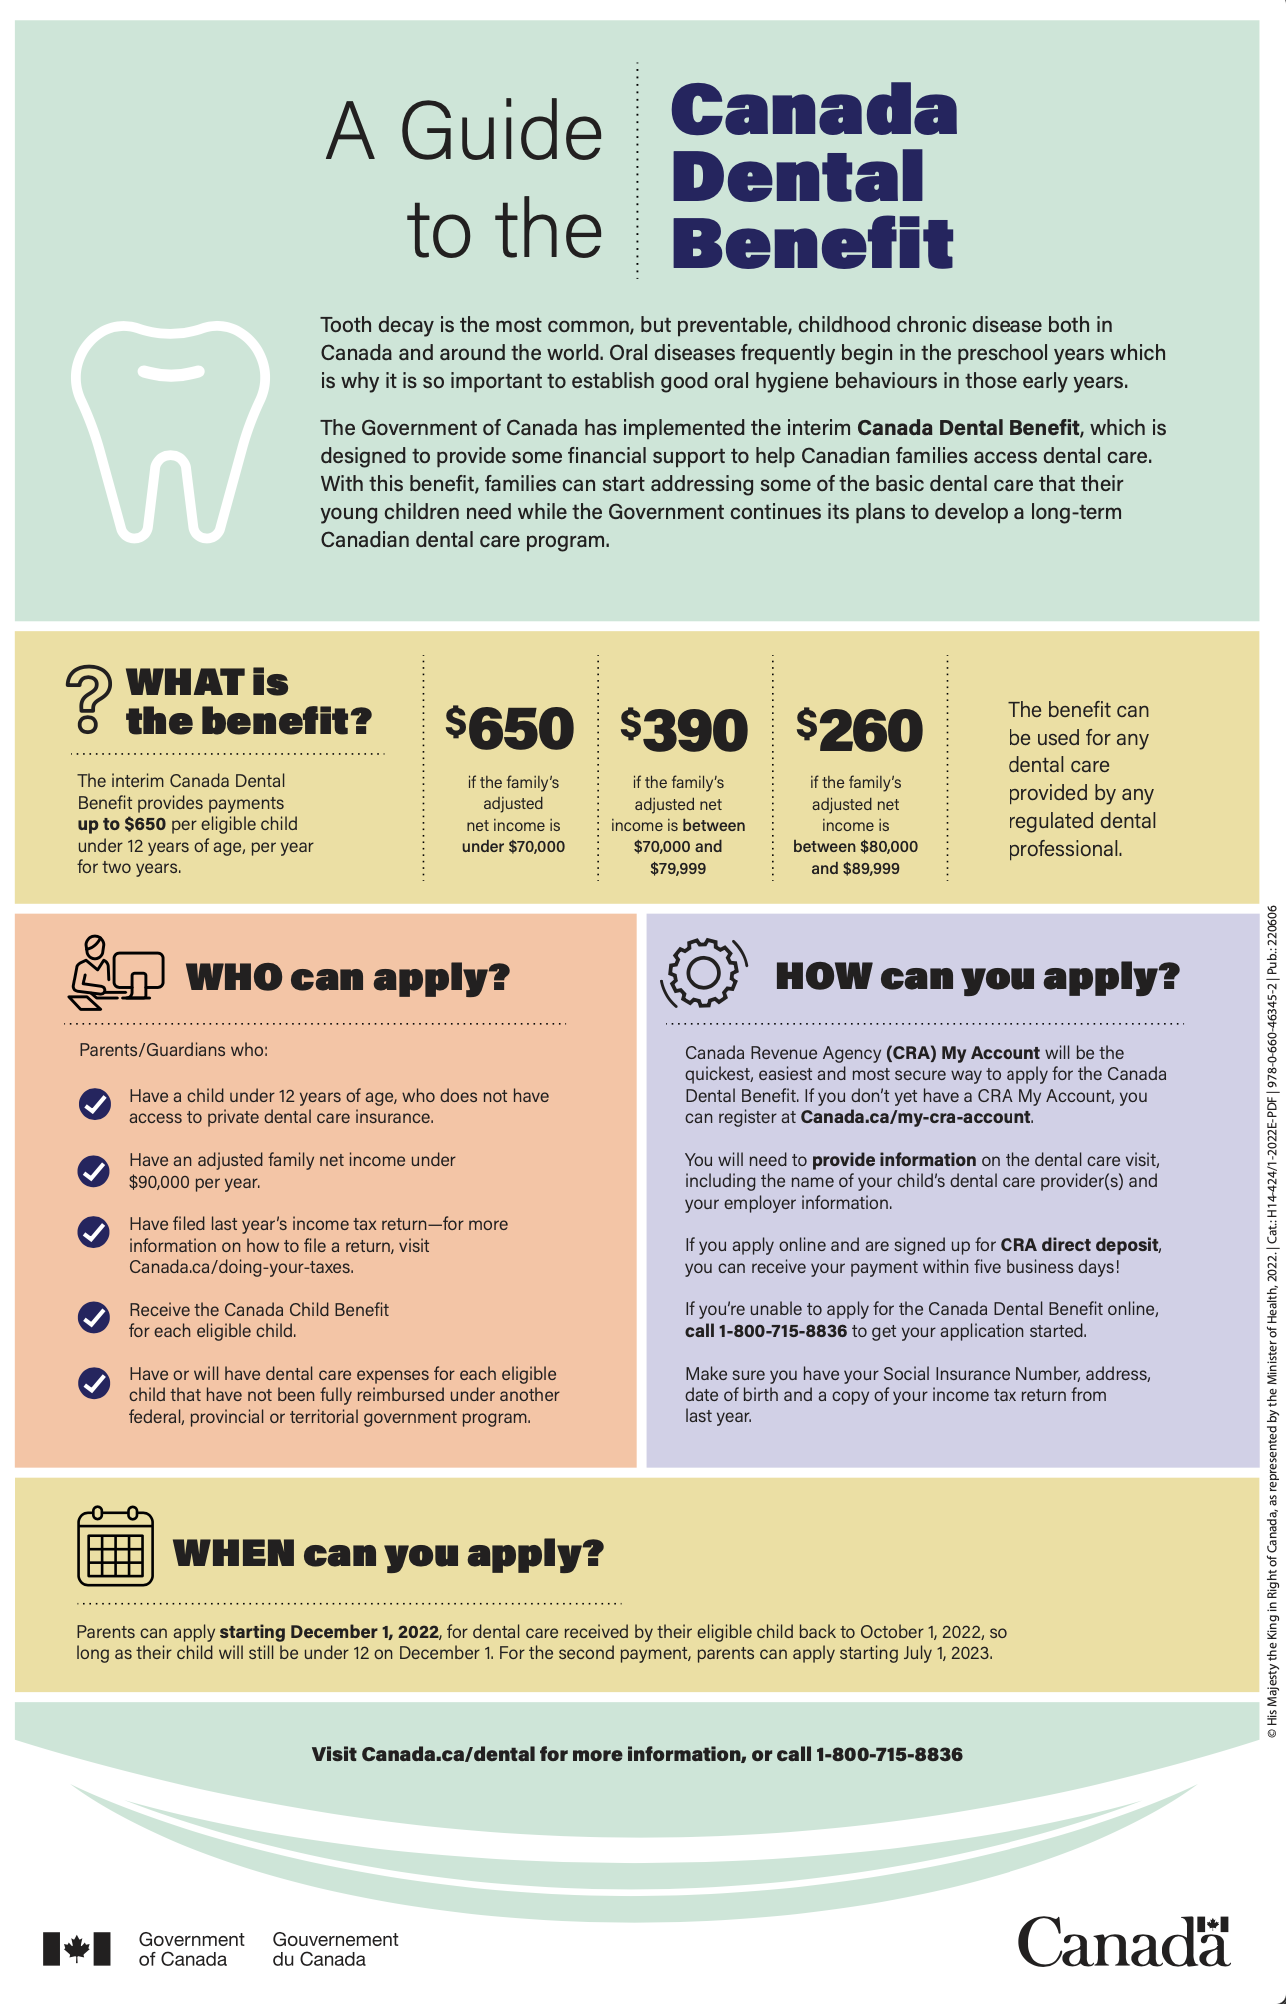 Canada Dental Benefit Infographic